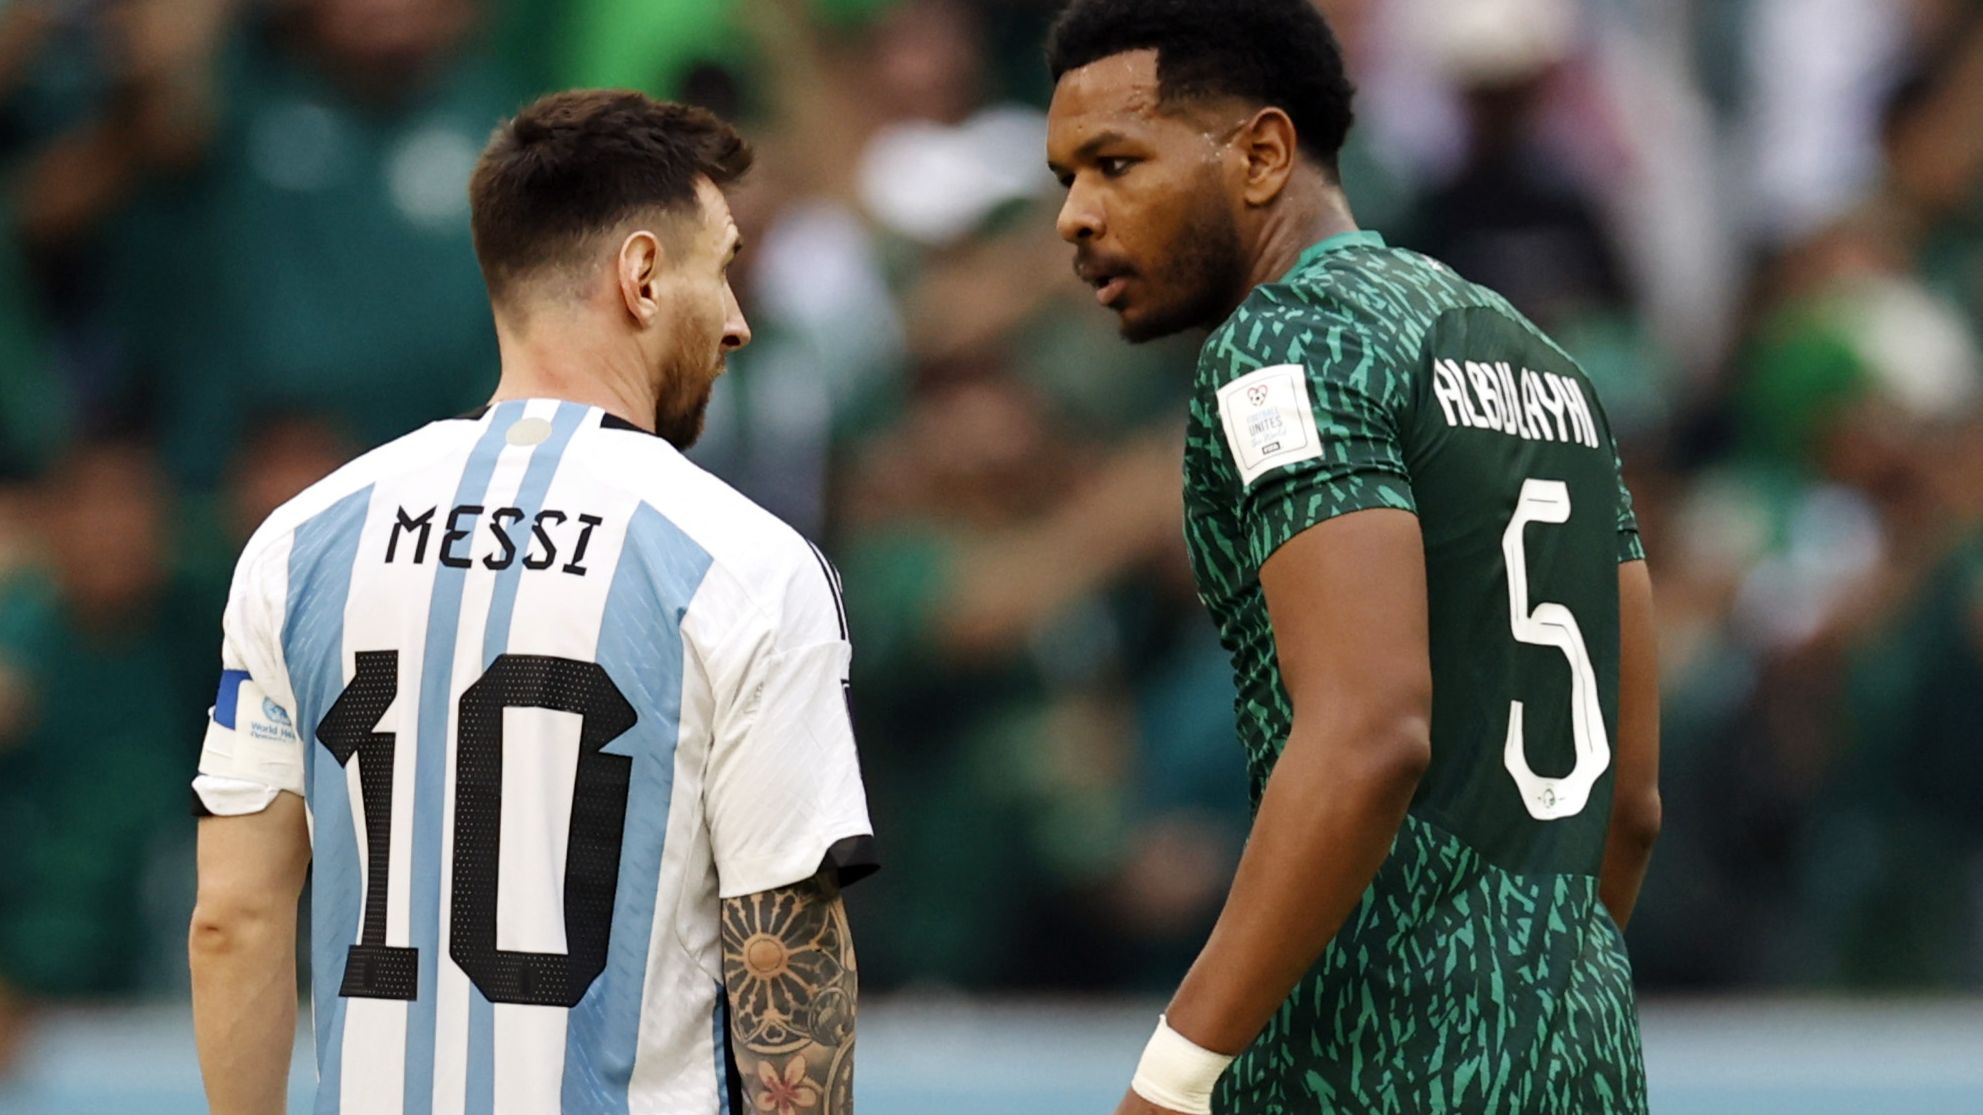 'You won't win': Saudi Arabia defender reveals mid-match taunt to Lionel Messi after shocking upset